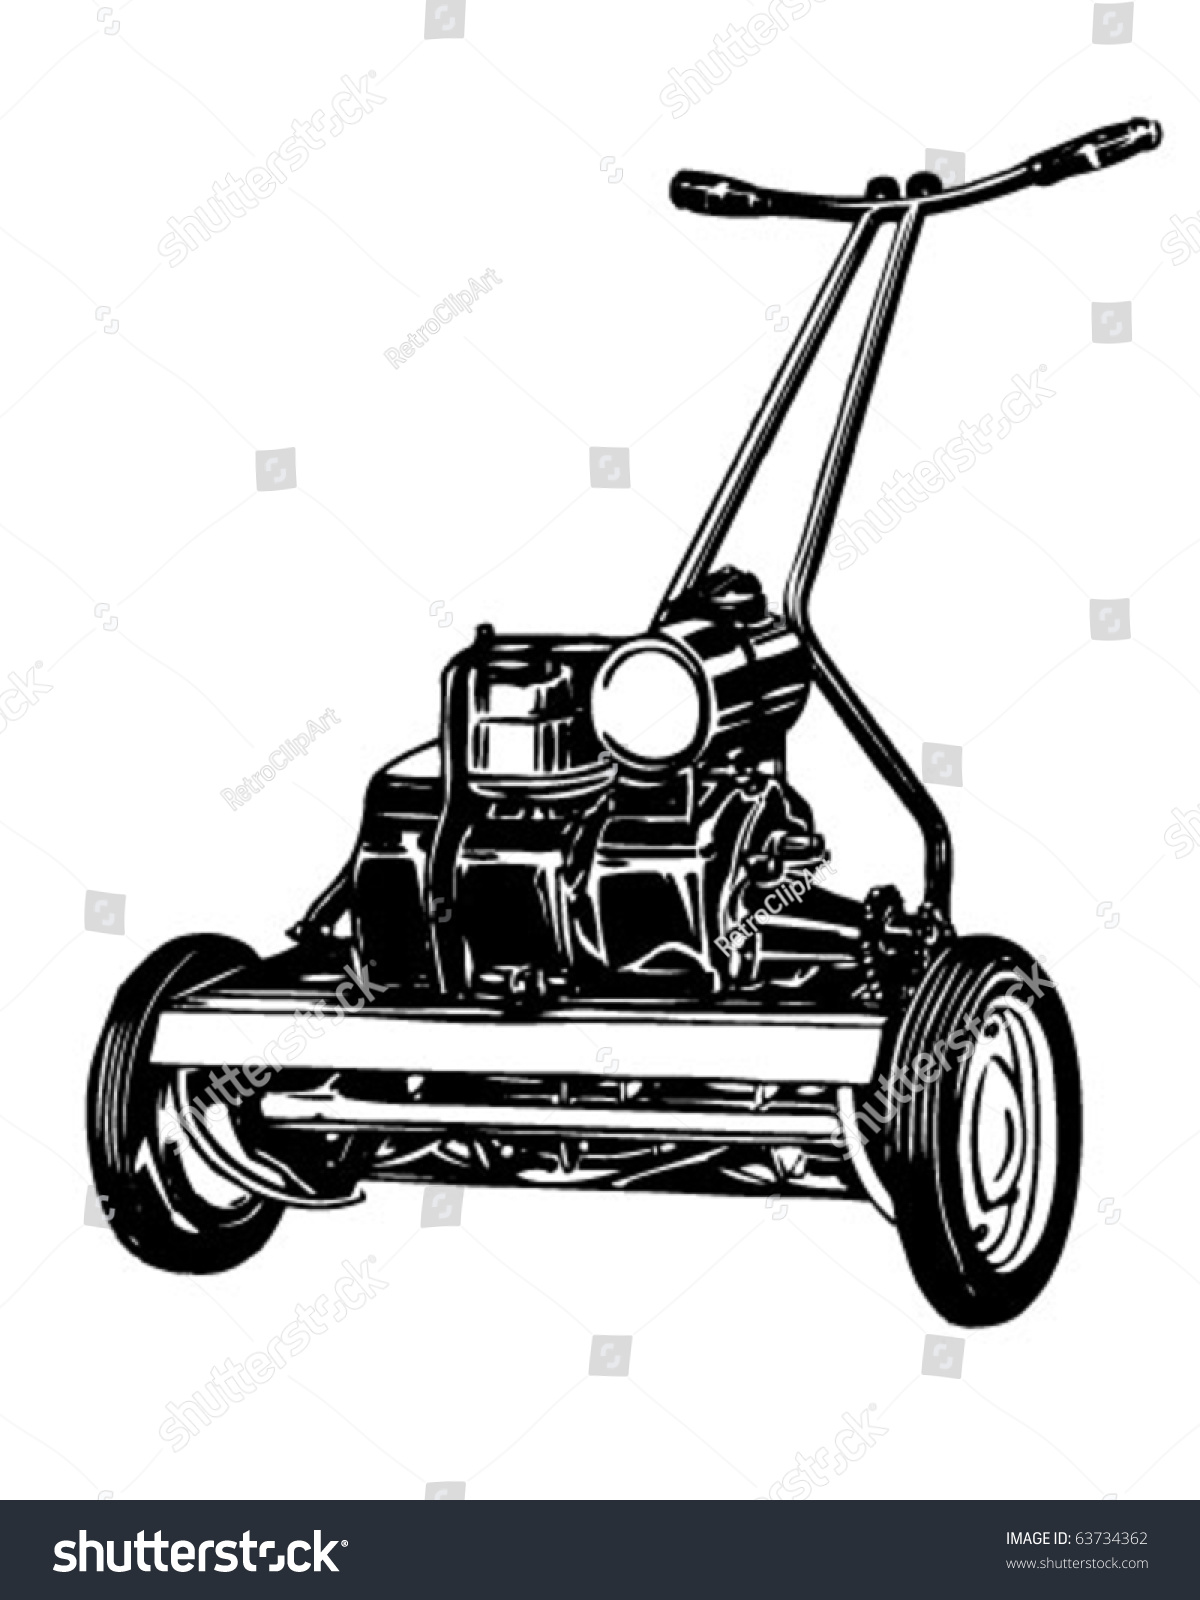 lawn mower clipart free vector - photo #45